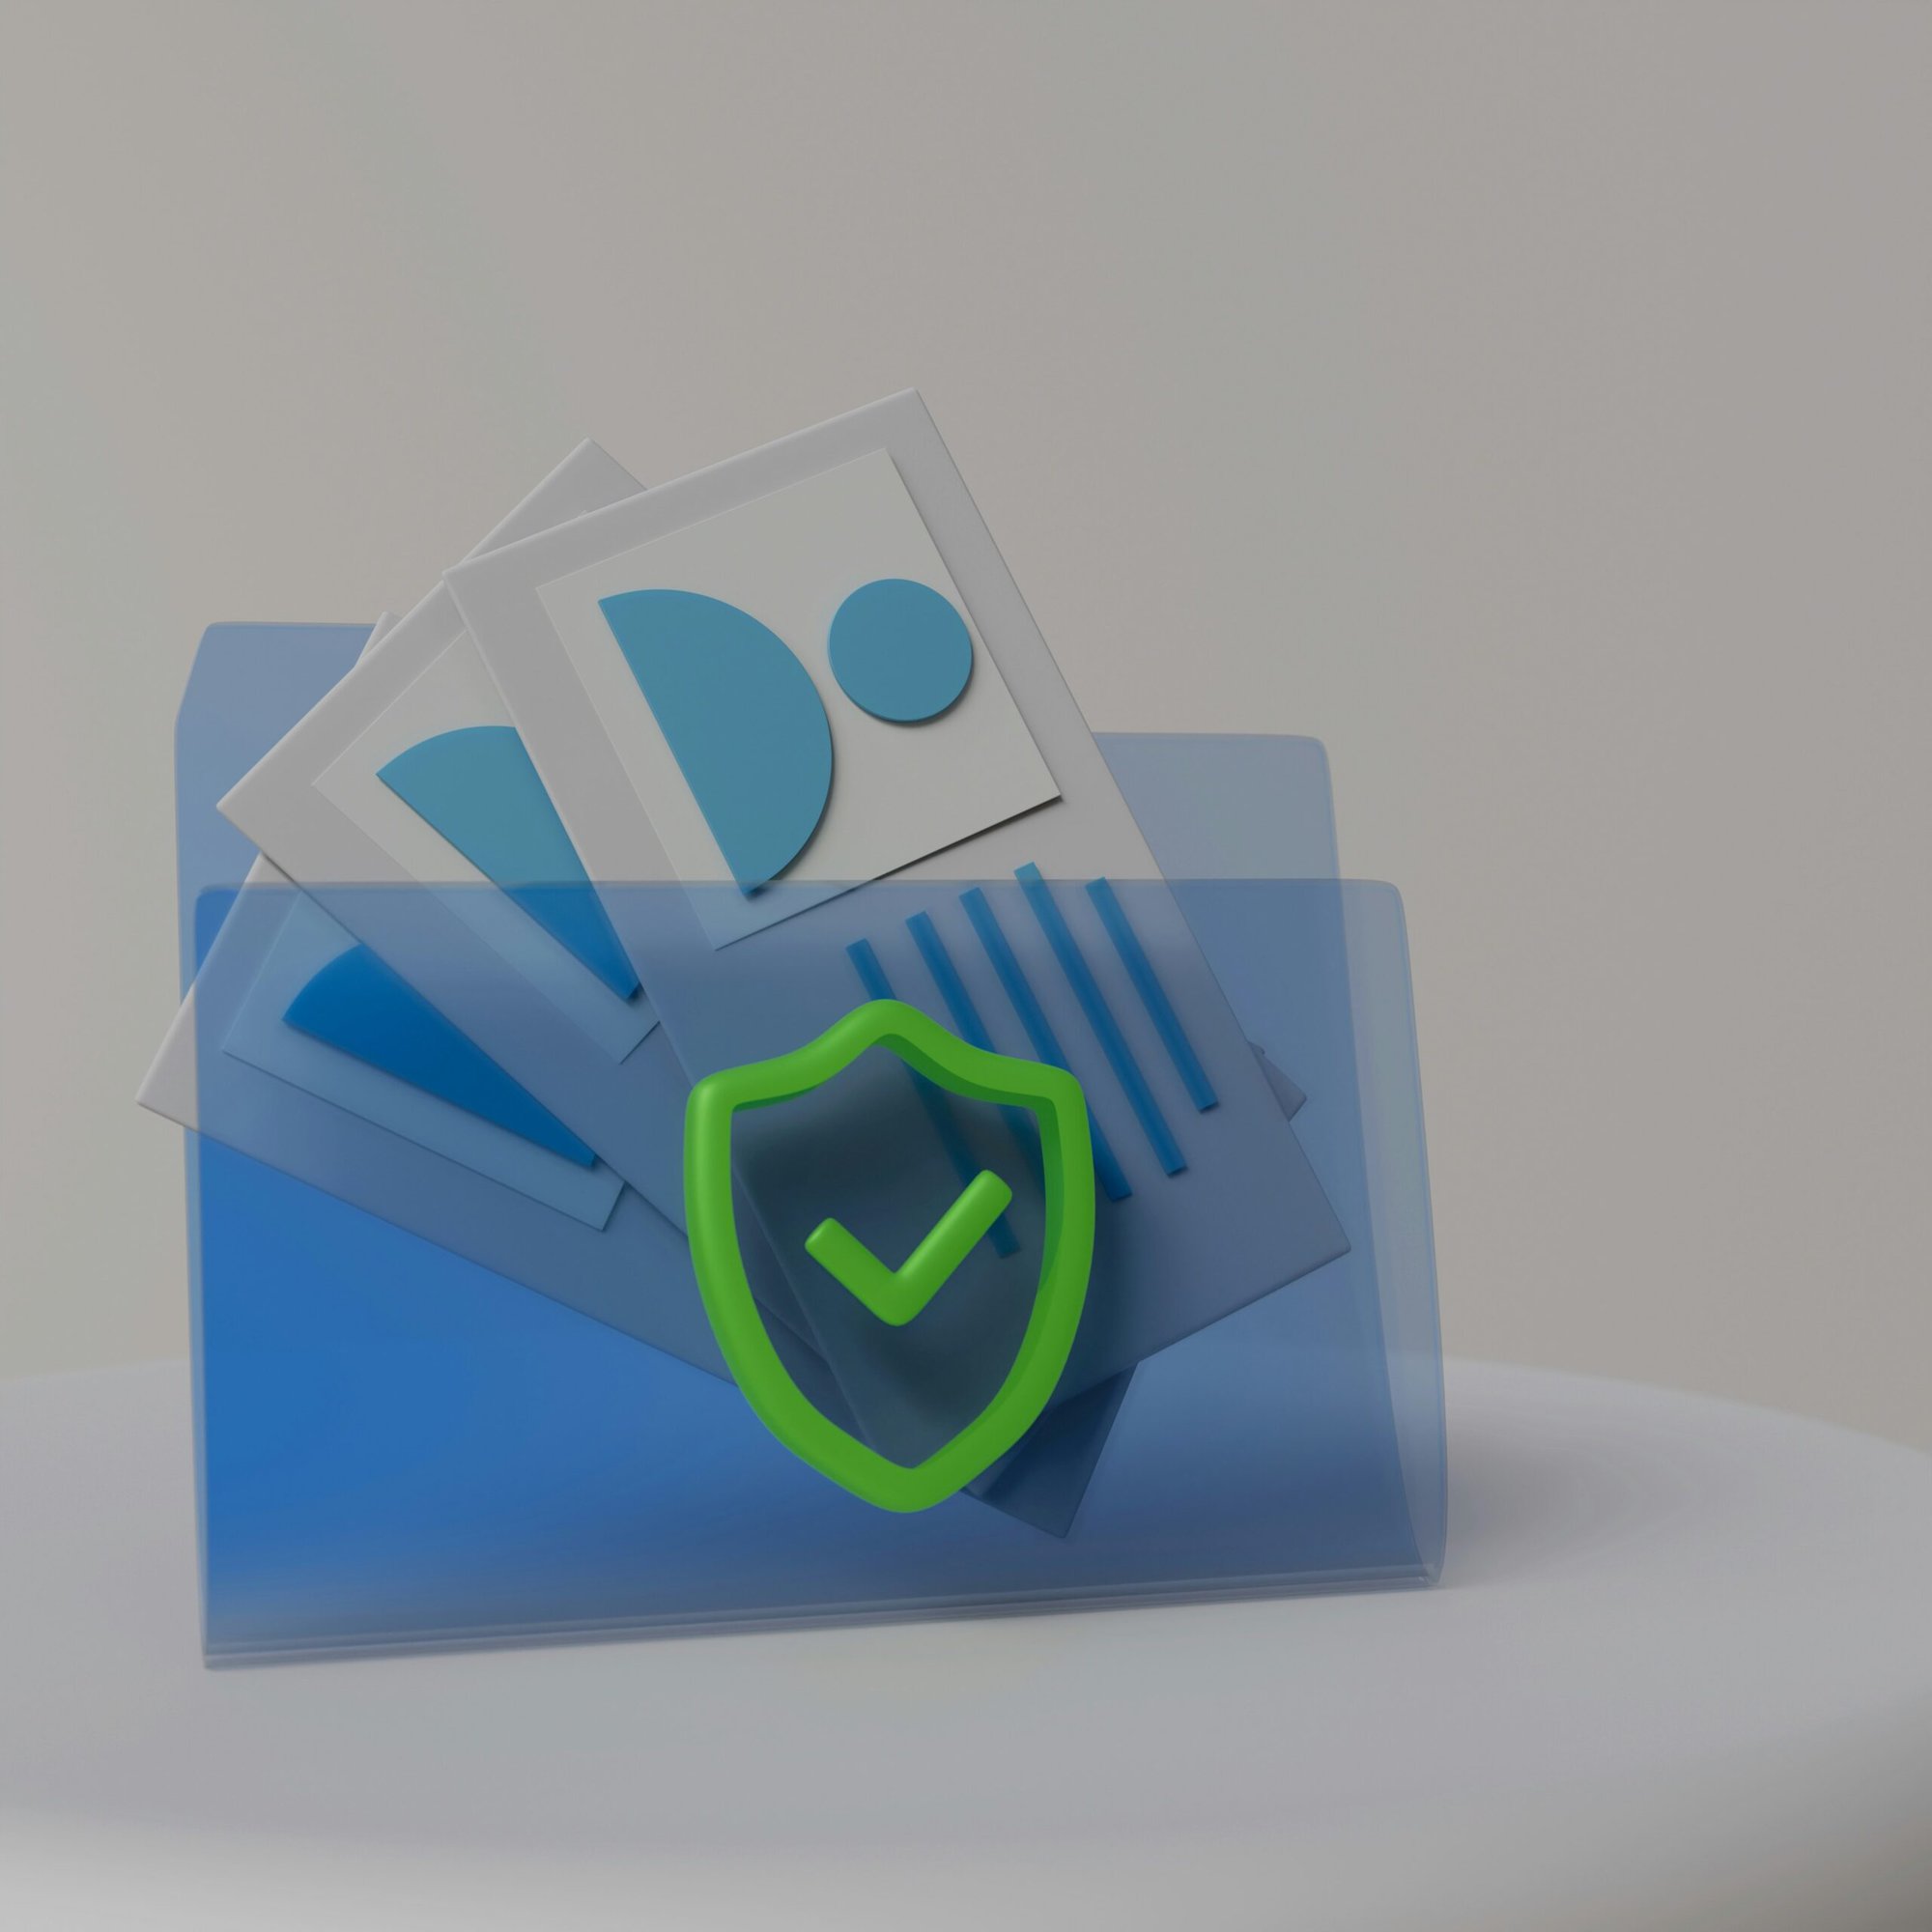 A blue folder with papers sticking out of it and a green checkmark on the front, symbolizing secure information processing.